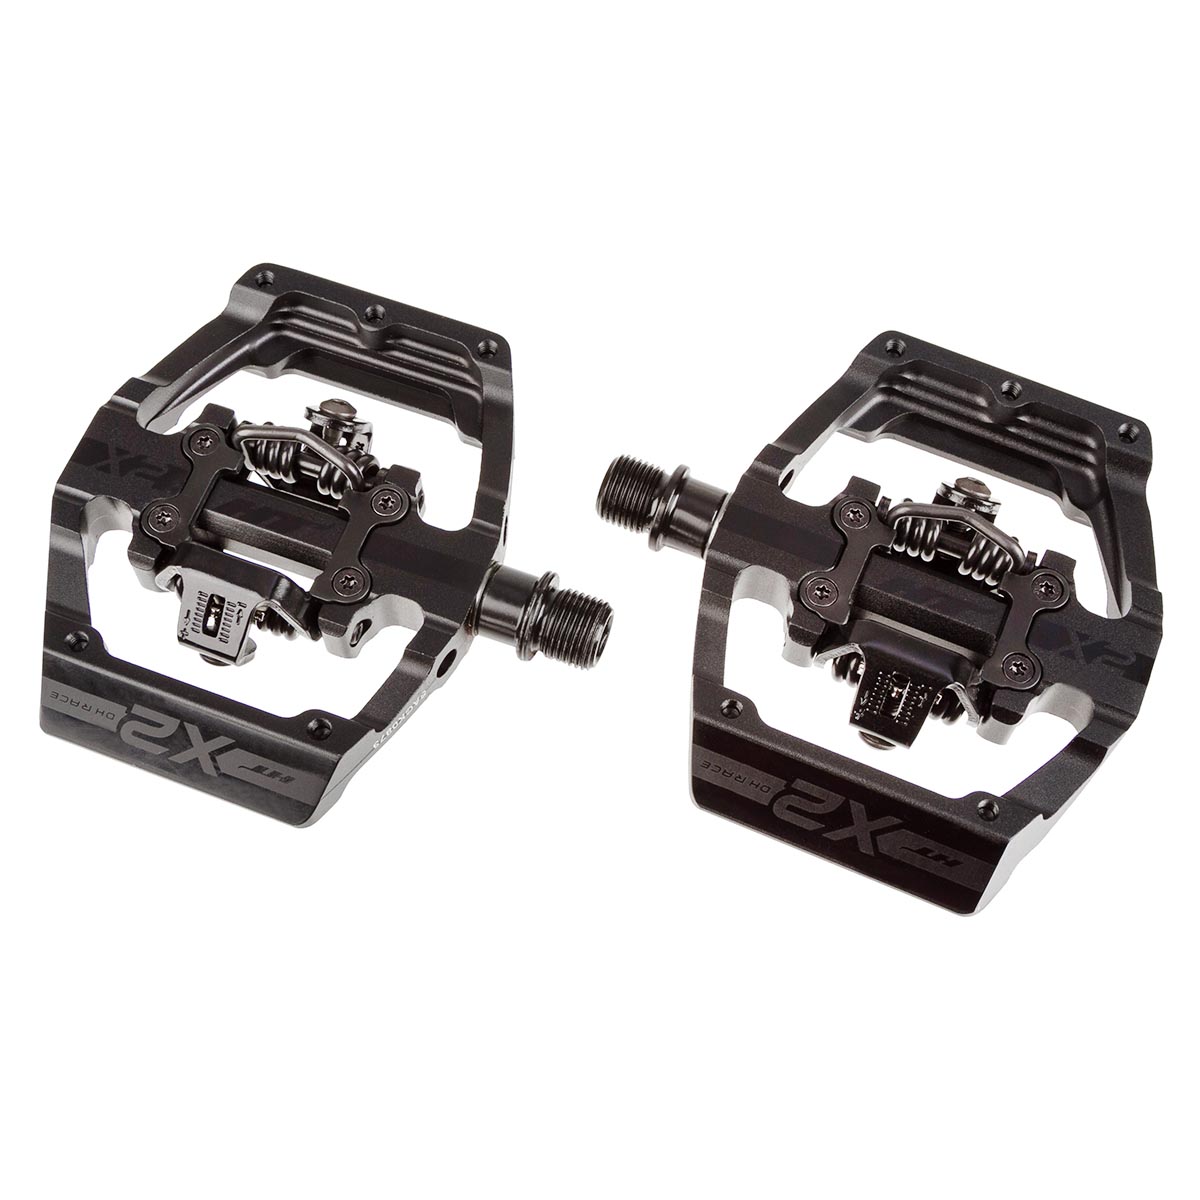 HT Components Klickpedale X2